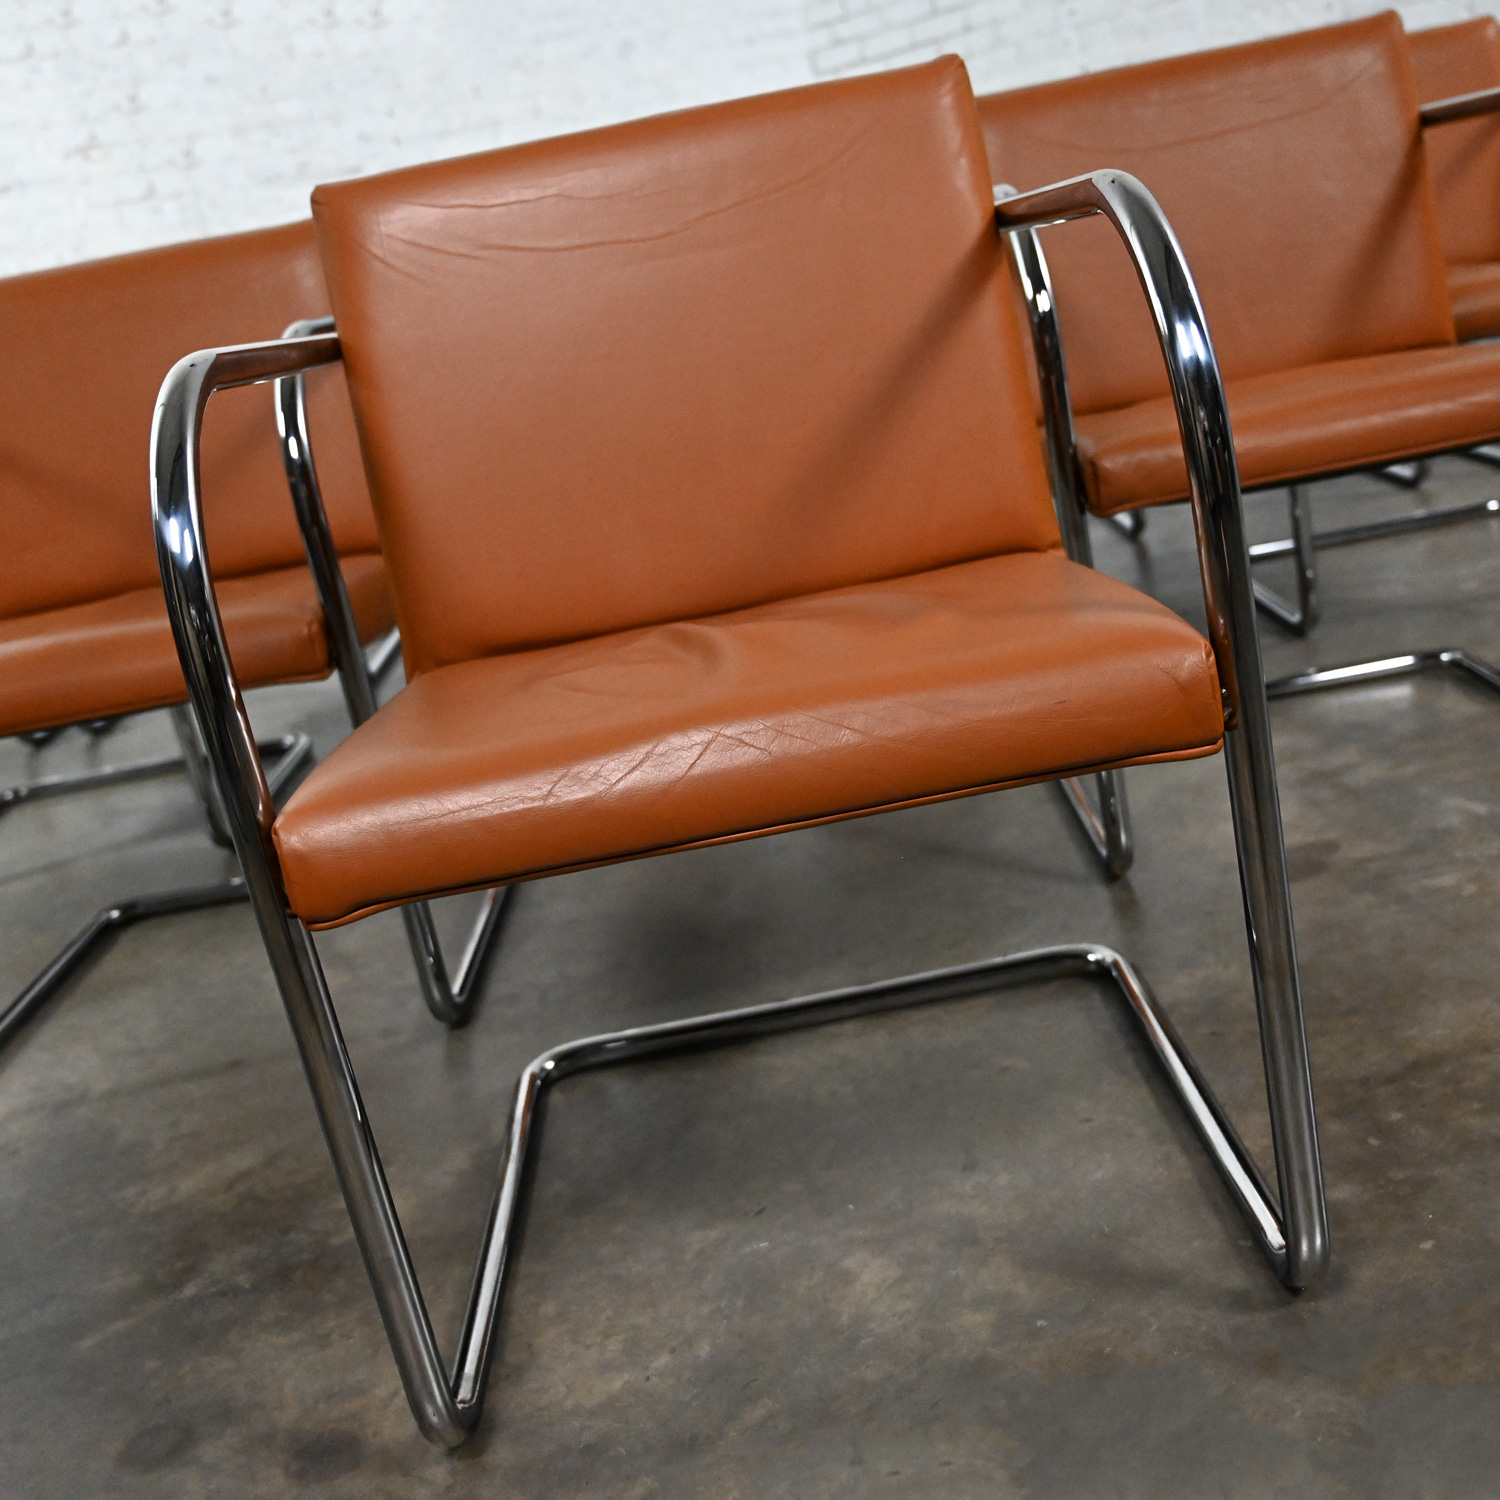 Late 20th to Early 21st Century Bauhaus Thonet Brno Style Chairs Chrome & Cognac Leather Cantilever Set of 12